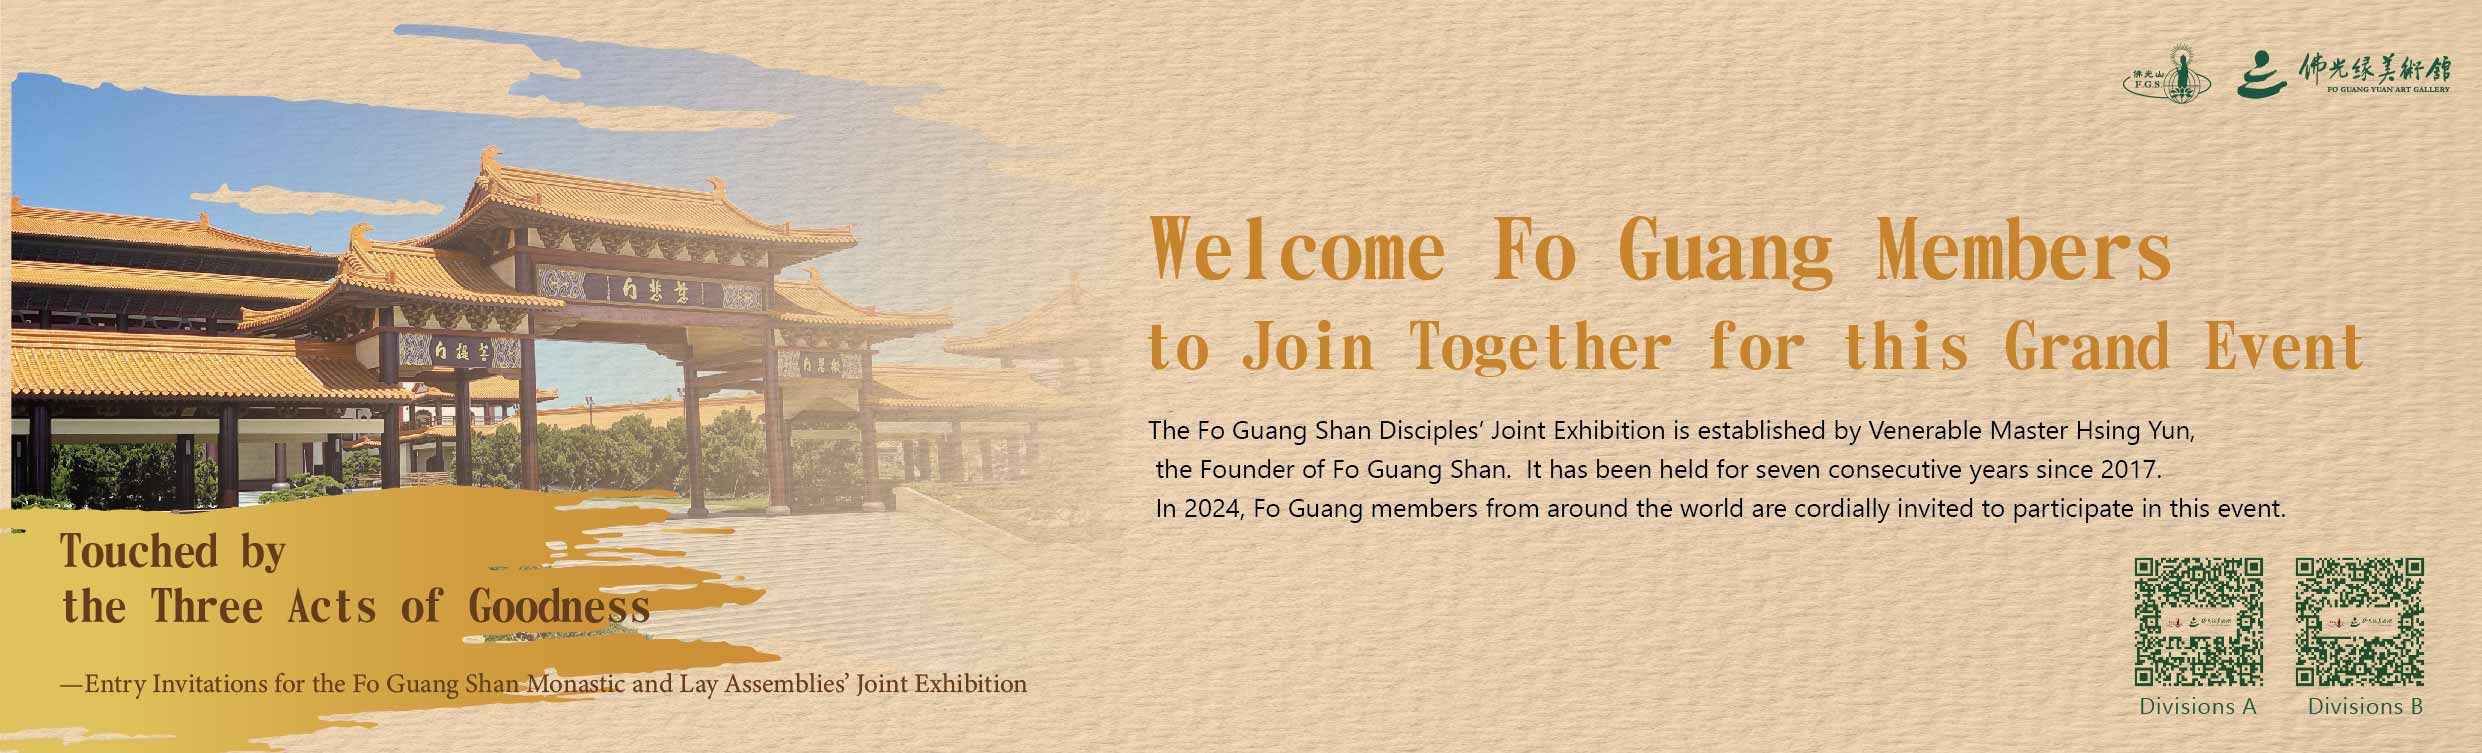 Touched by the Three Acts of Goodness Entry Invitations for the Fo Guang Shan Monastic and Lay Assemblies' Joint Exhibition (Division B)